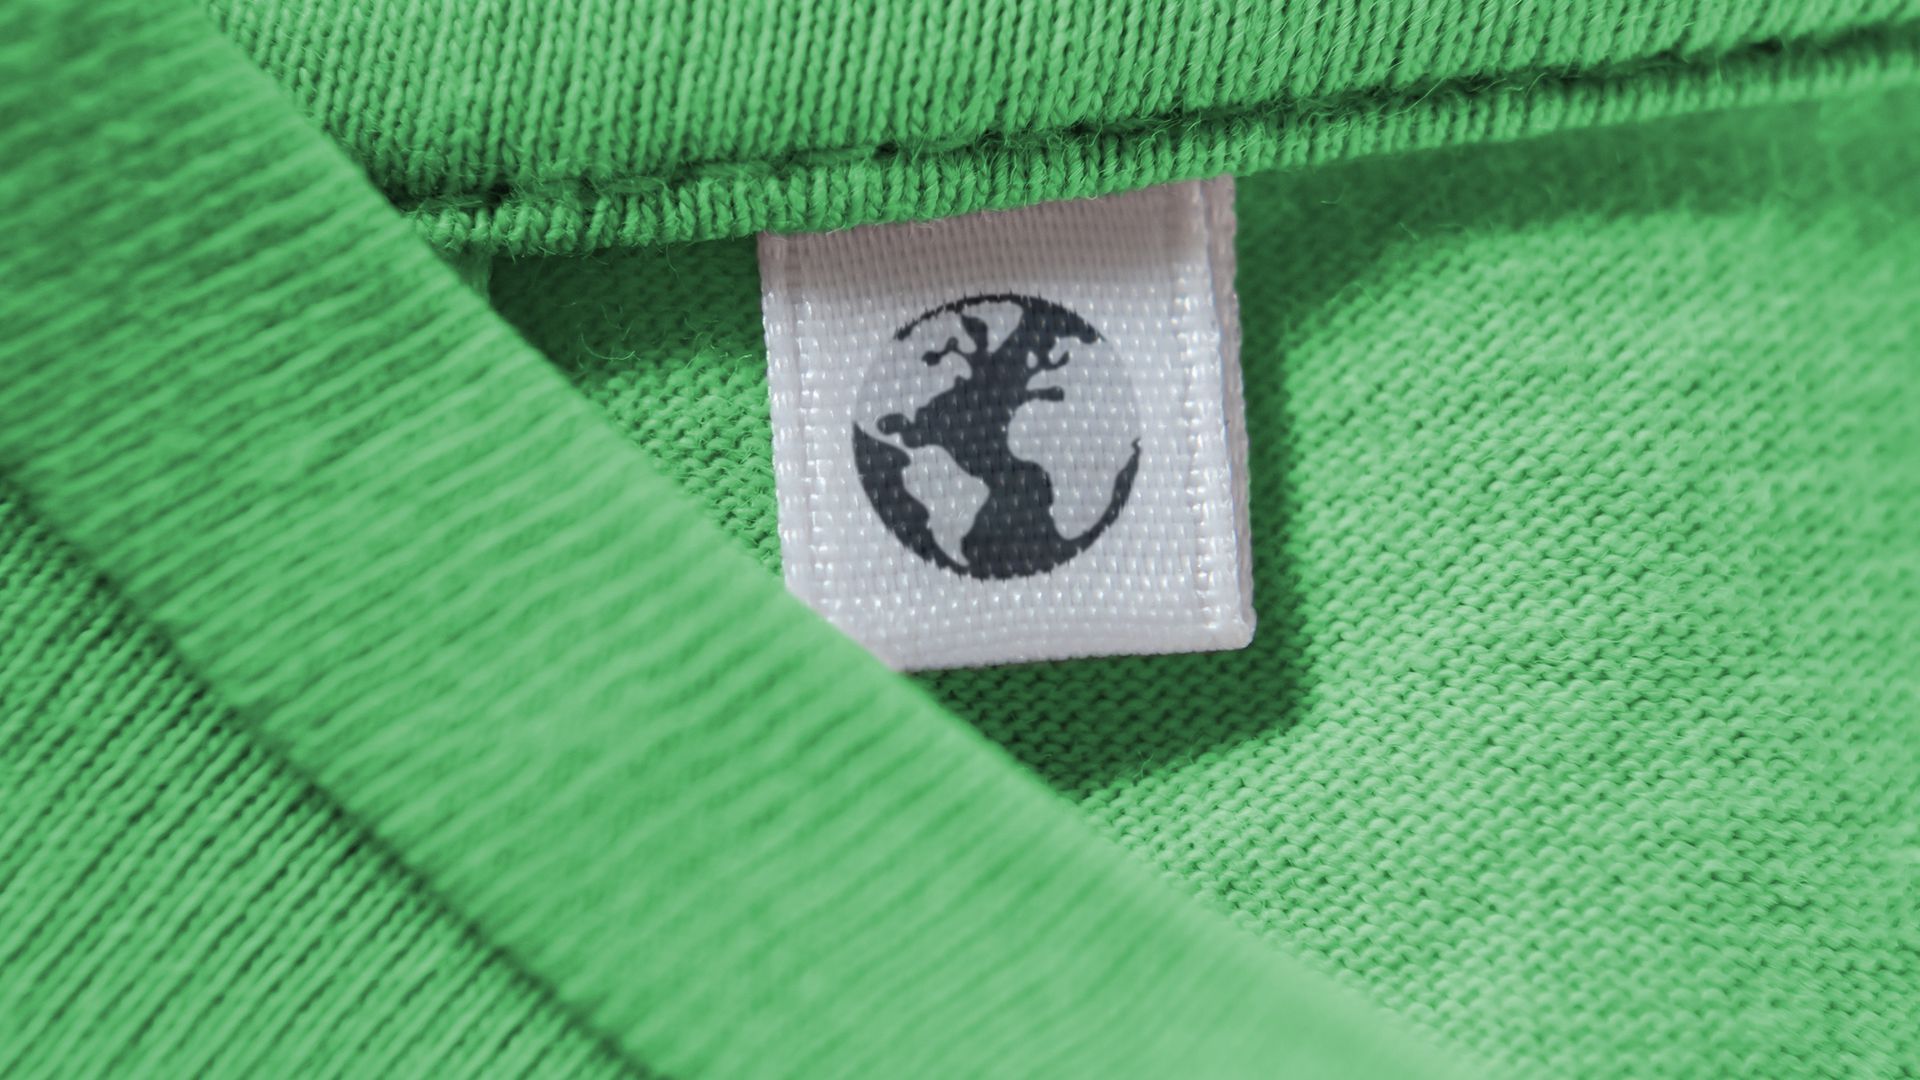 Illustration of a shirt tag printed with an Earth icon